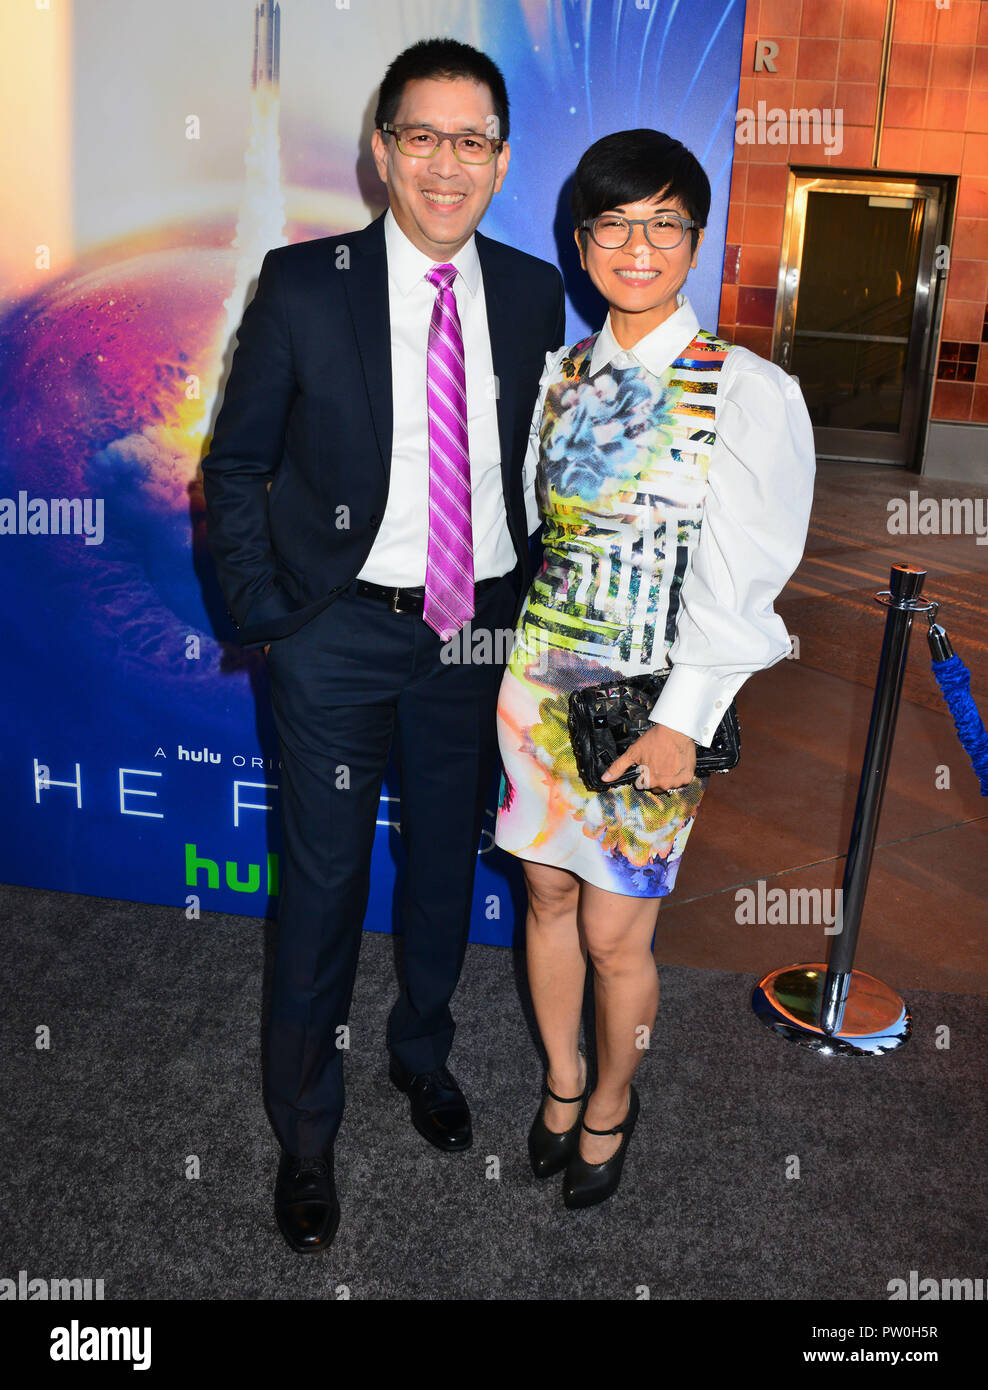 Scott Takeda, Keiko Agena 018 attends the premiere of Hulu's 'The First' on September 12, 2018 in Los Angeles, CaliforniaScott Takeda, Keiko Agena 018 attends the premiere of Hulu's 'The First' on September 12, 2018 in Los Angeles, California Stock Photo